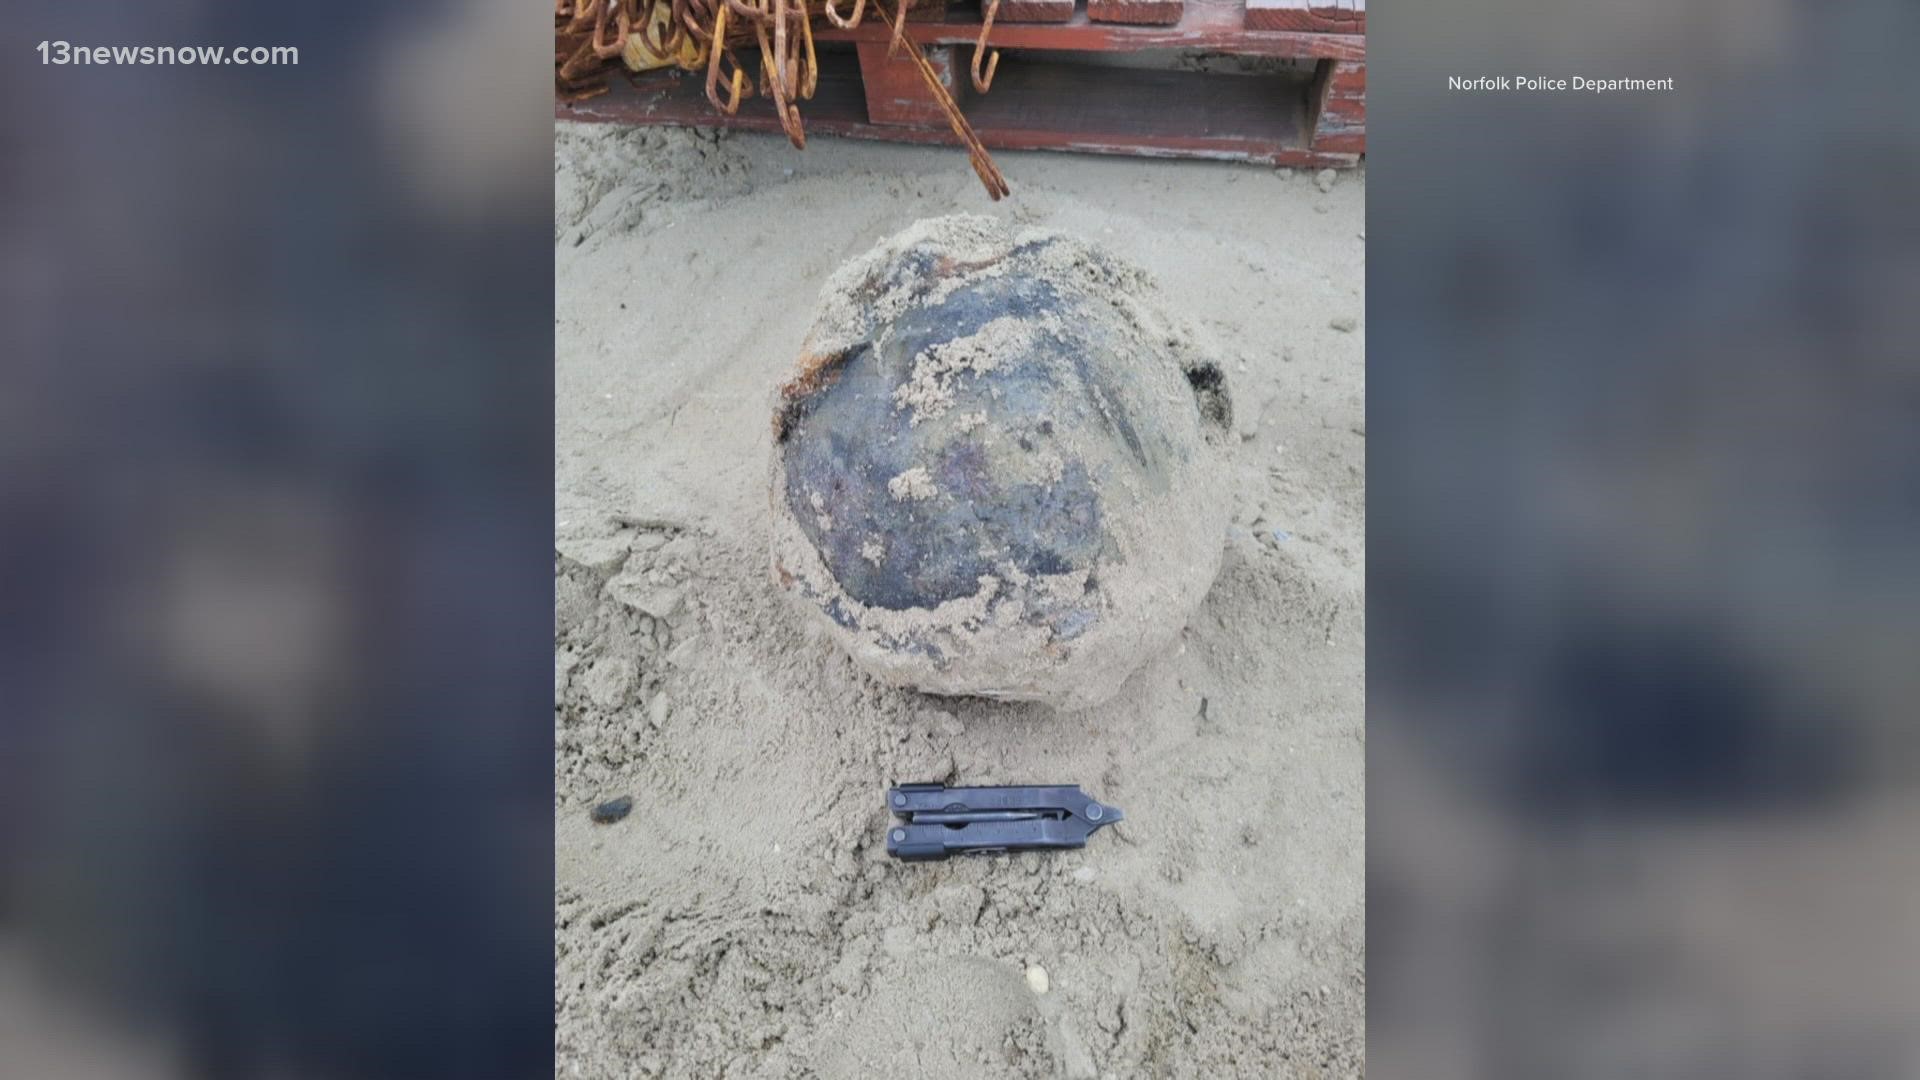 The Norfolk Police Department said construction crews found a "surprise" explosive device on the beach at Willoughby Spit.